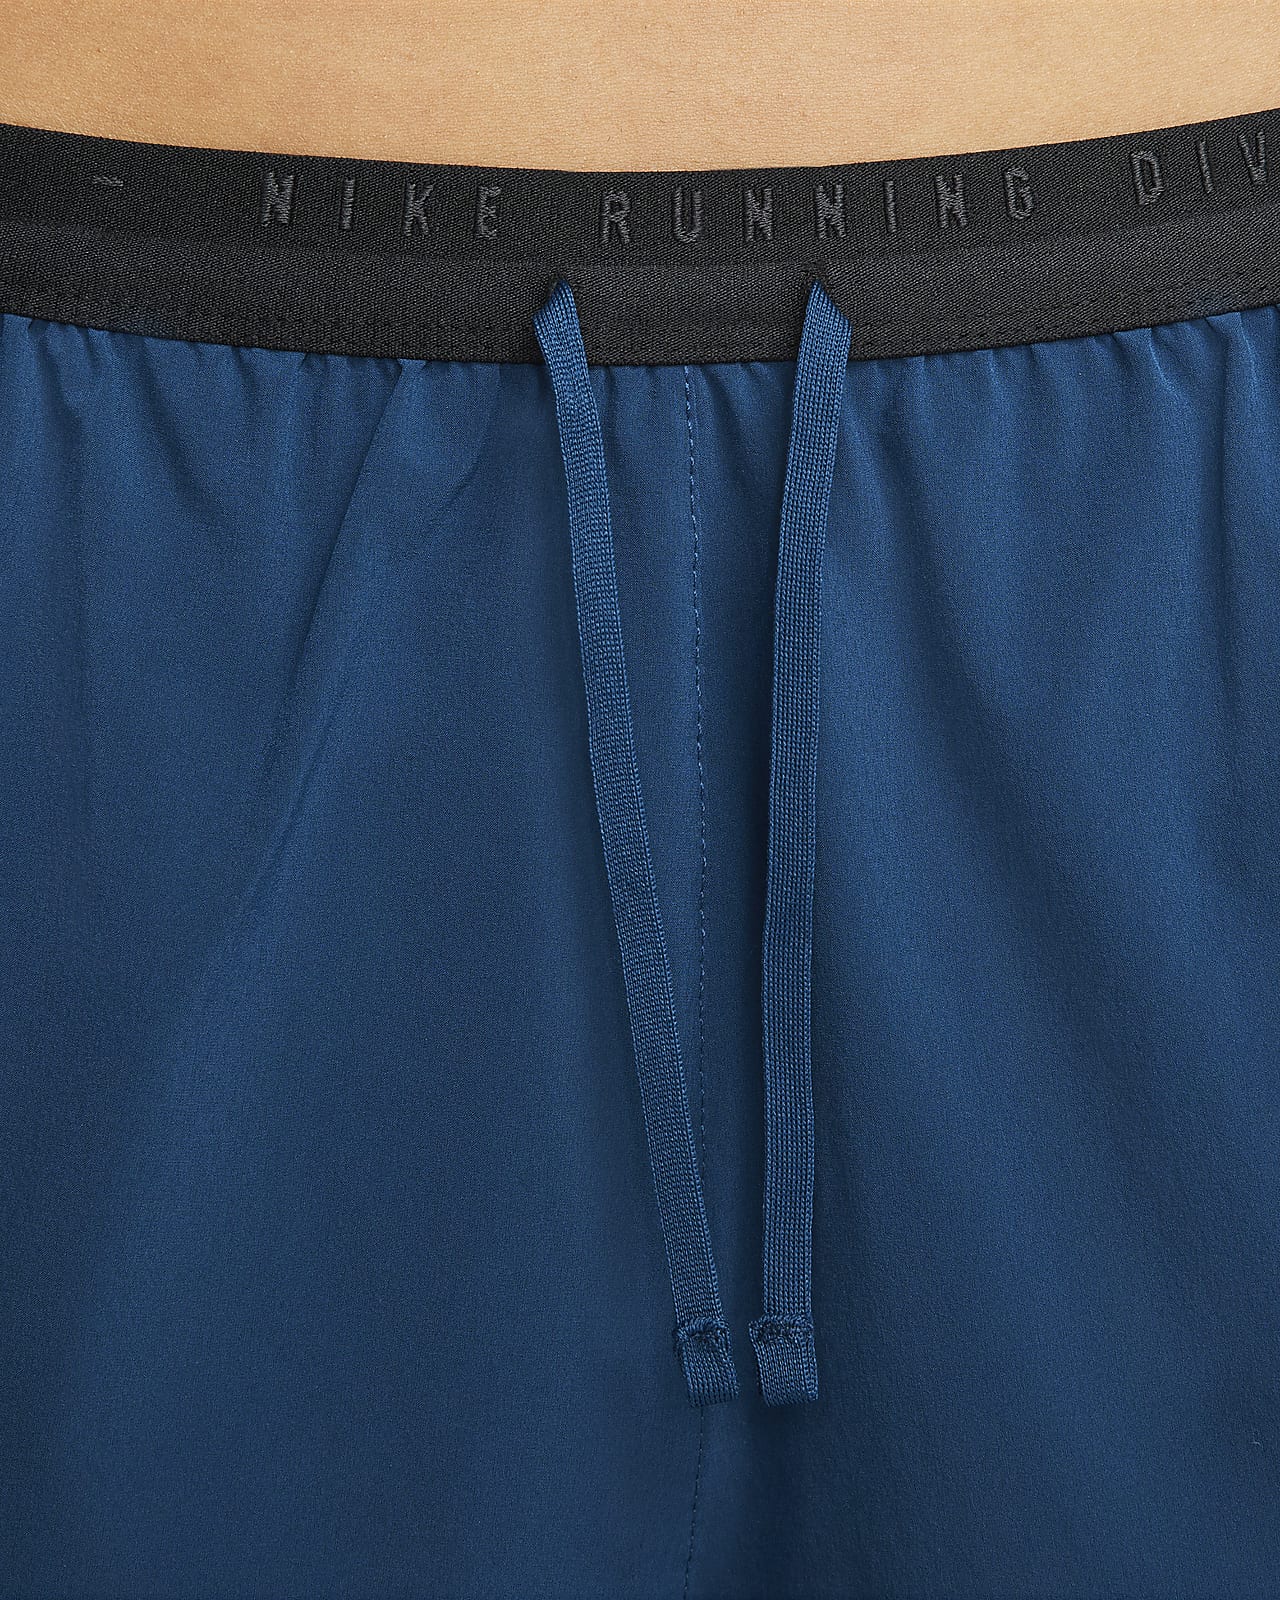 Nike Running Dri-FIT Tempo shorts in blue